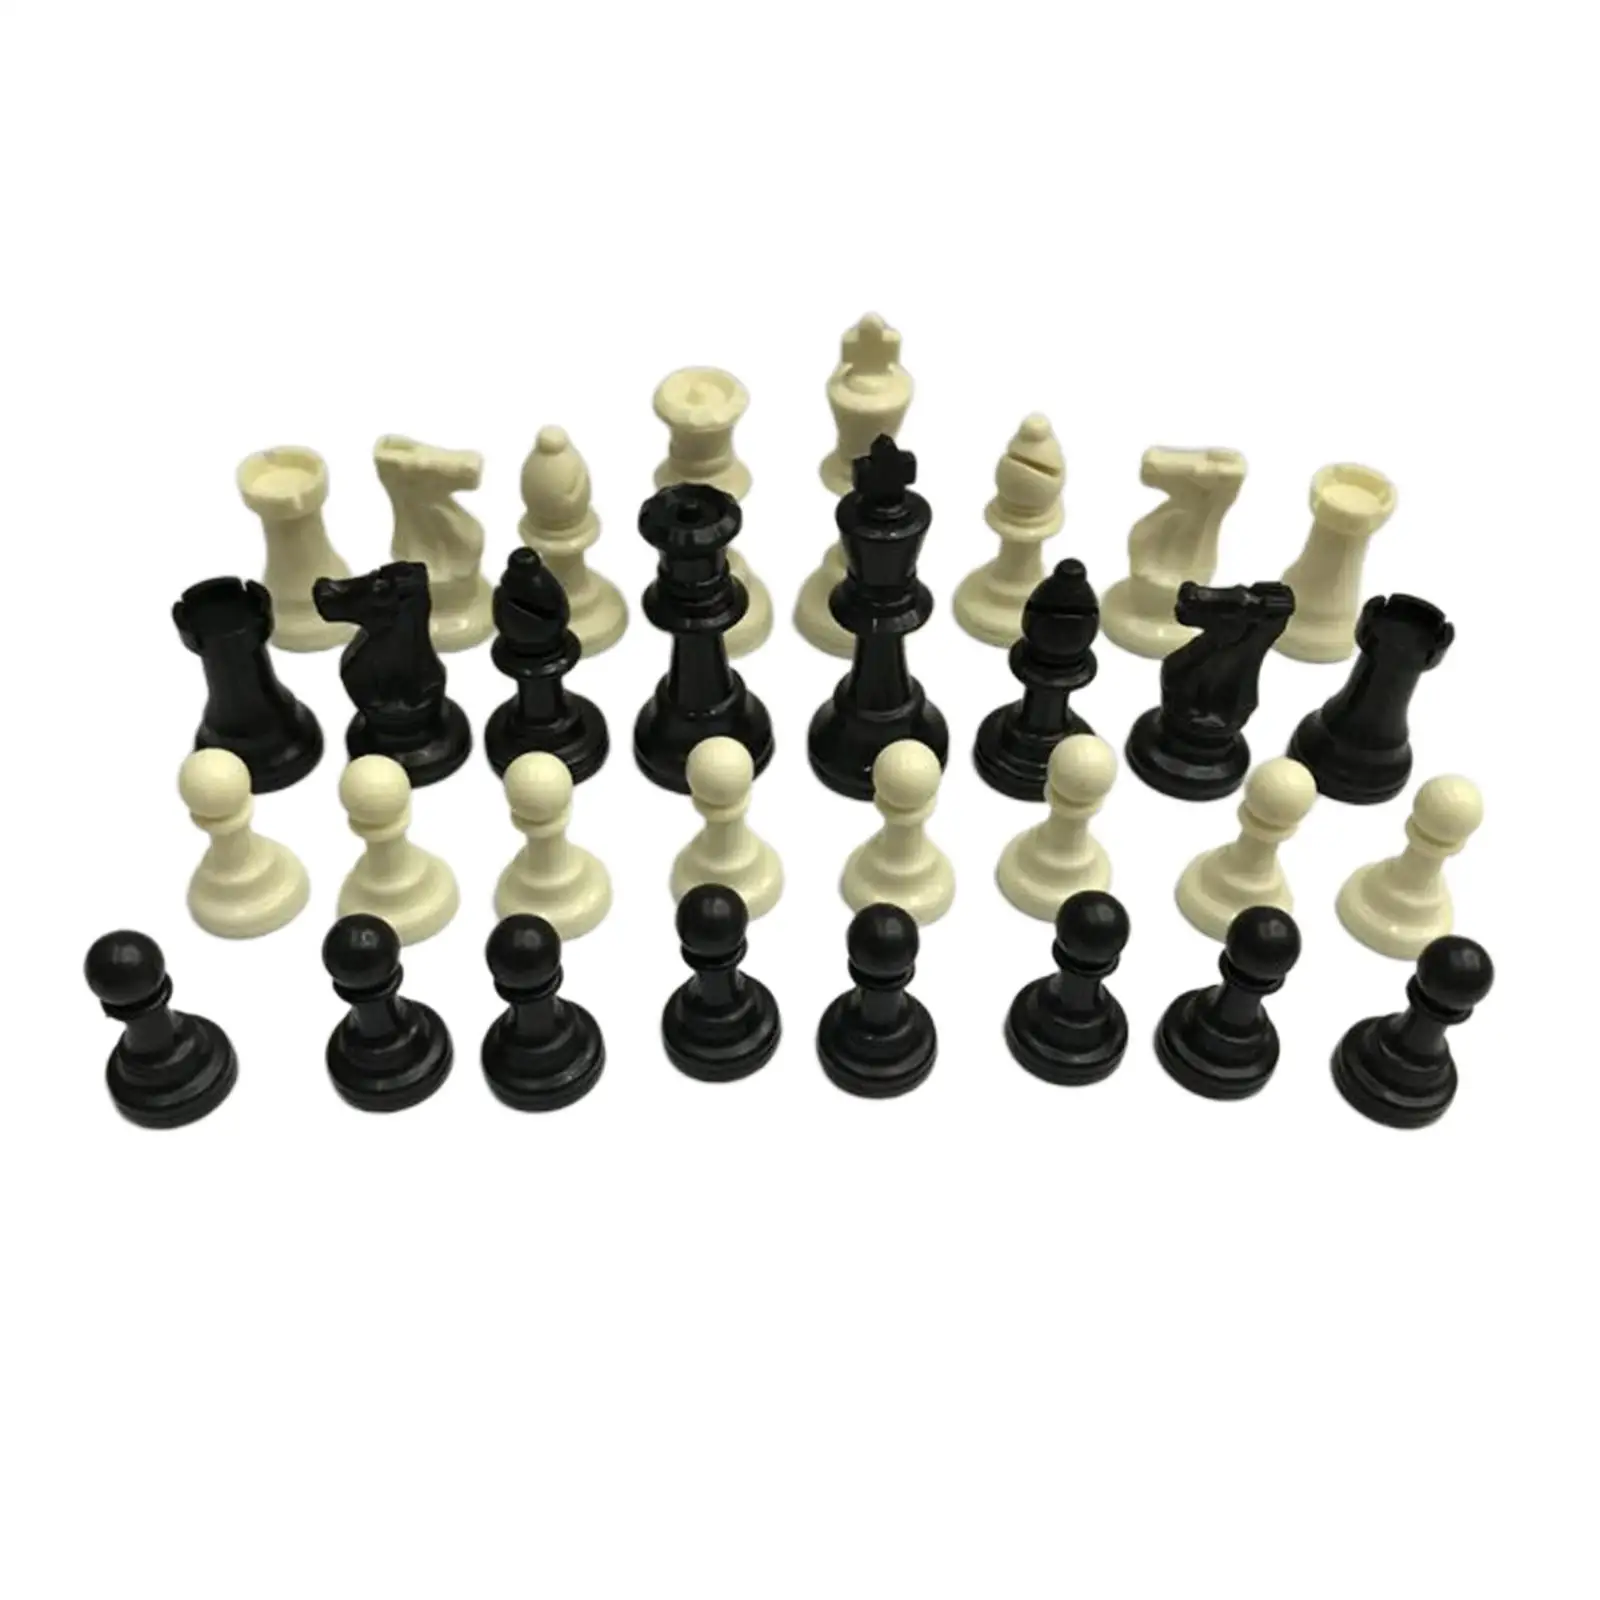 32x Chess Pieces Set Tournament Checkers Traveling Game 75mm King for Travel